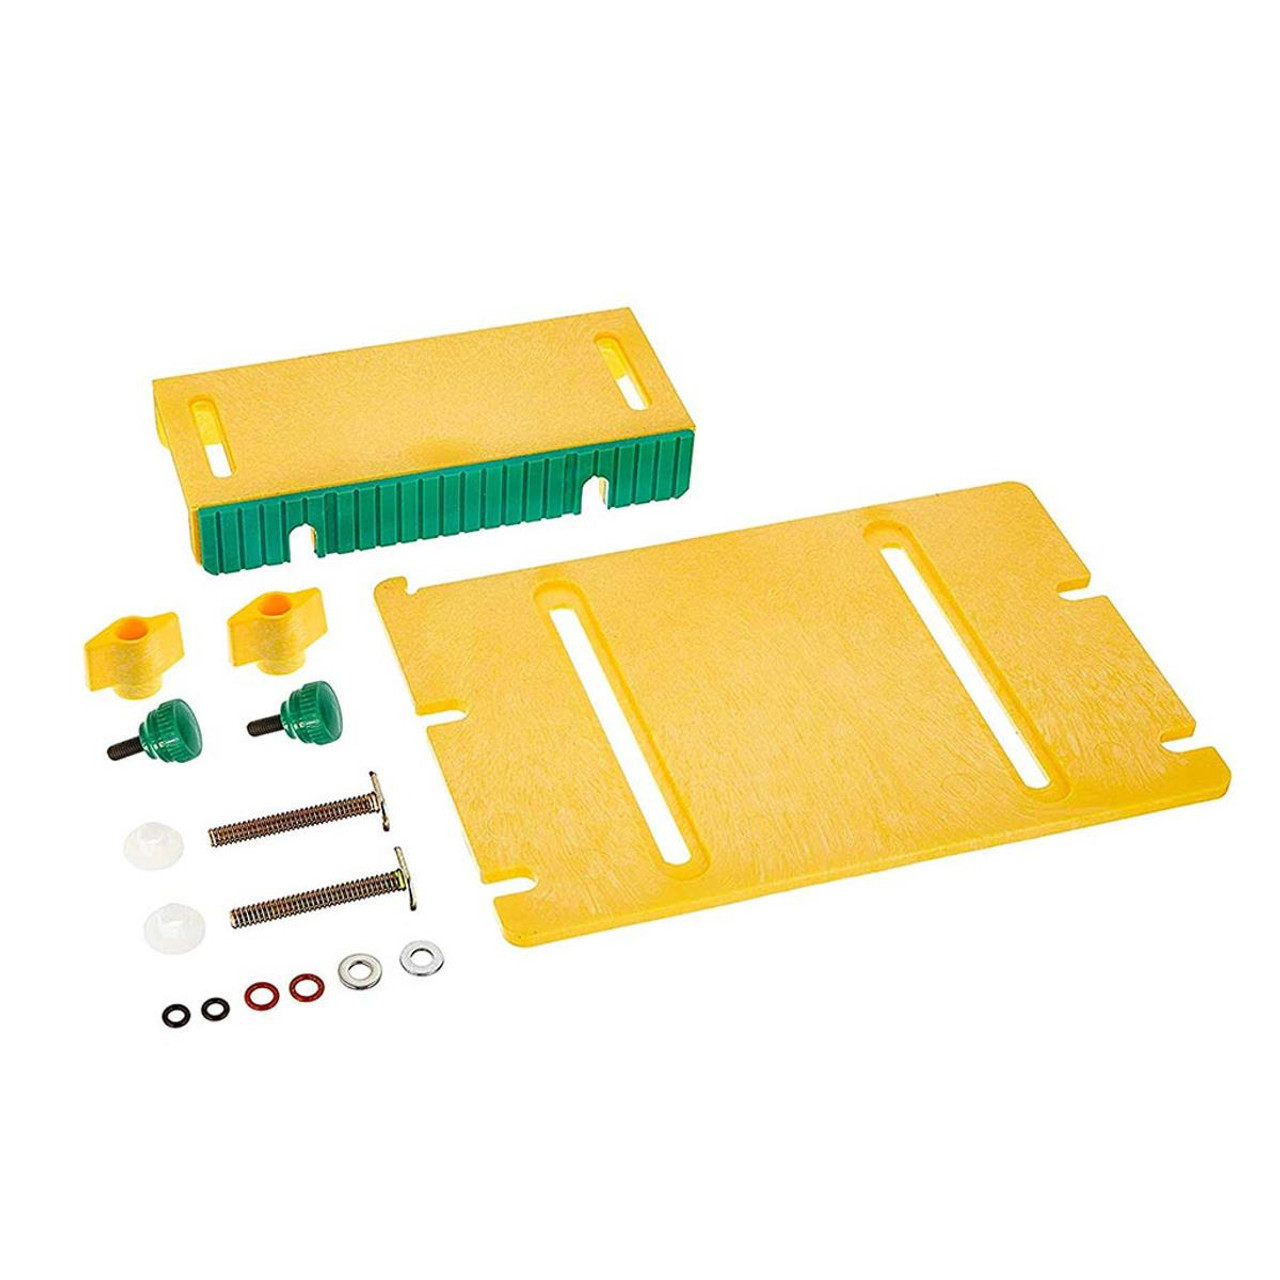 Micro Jig GRR-RIPPER Upgrade Kit for GR-100 Wood Workers Workshop